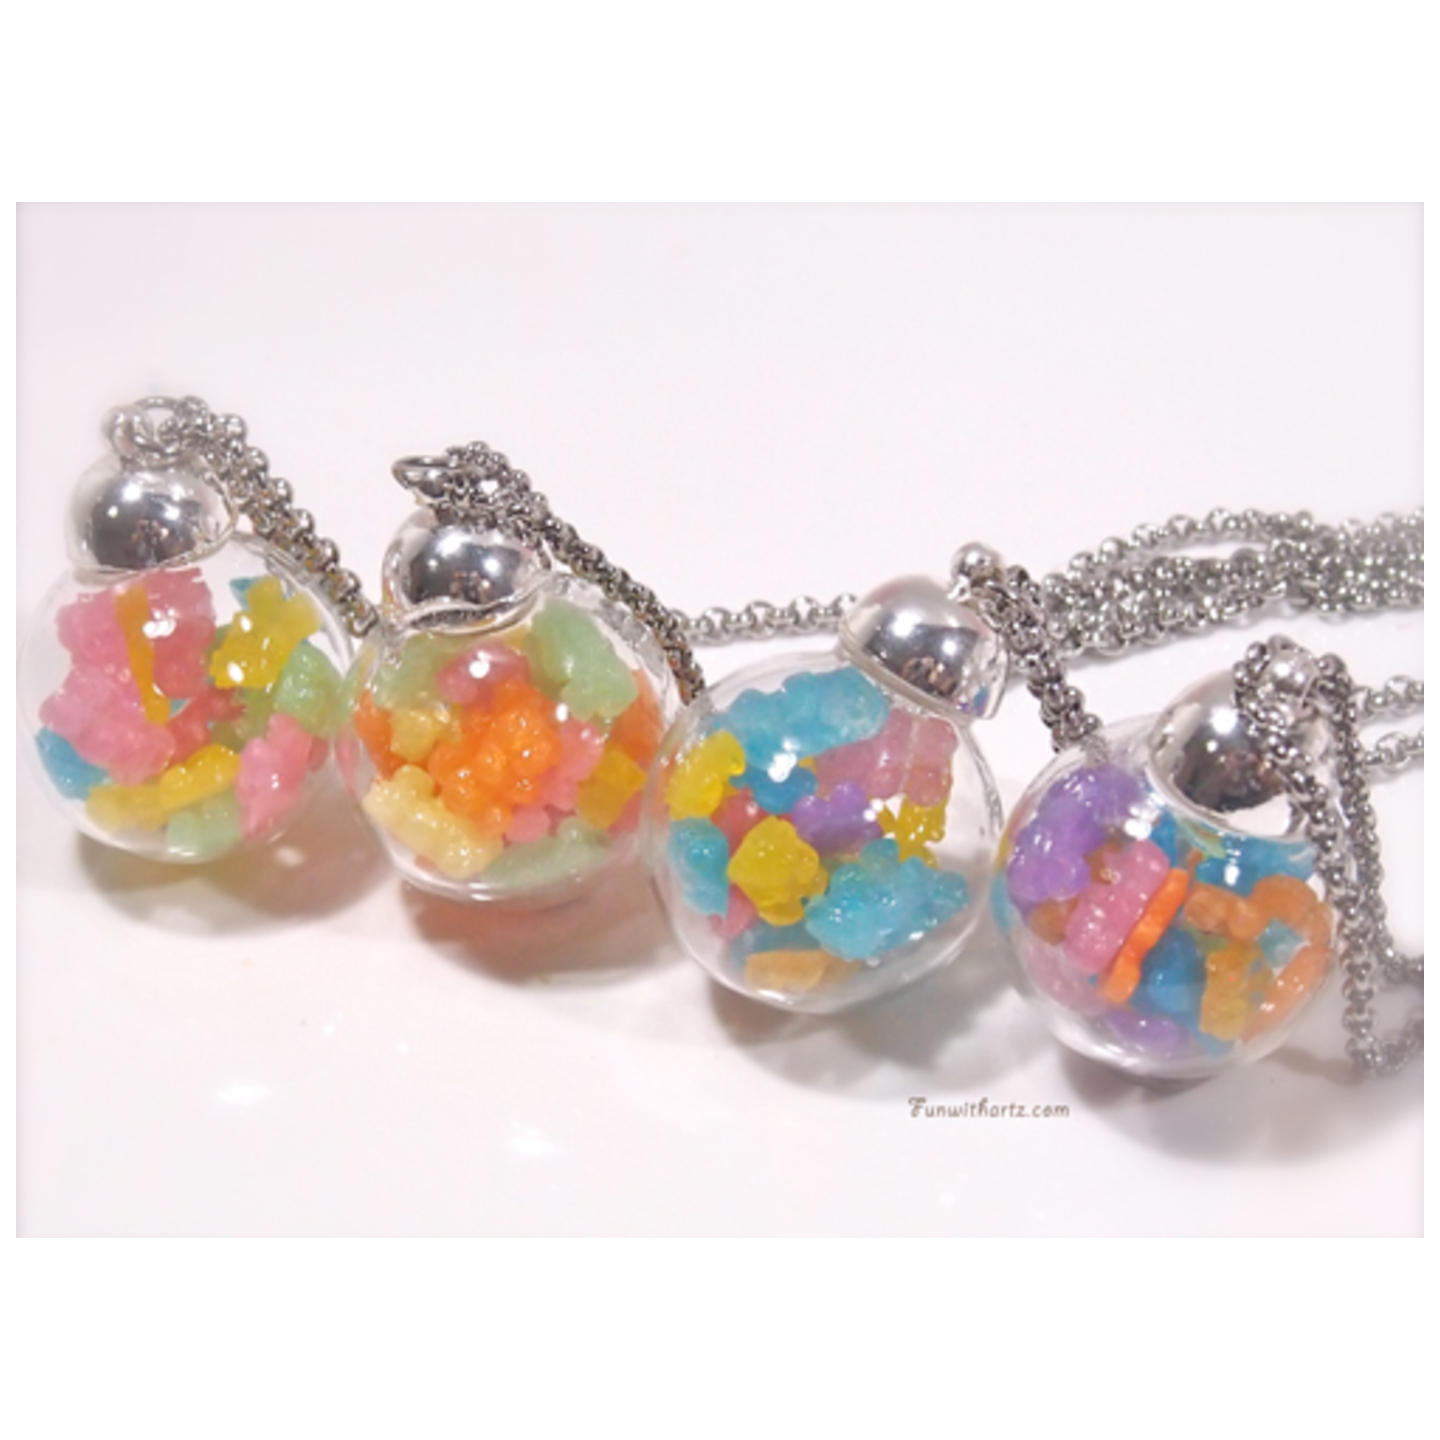 Gummy Bears in Glass Globe Necklaces